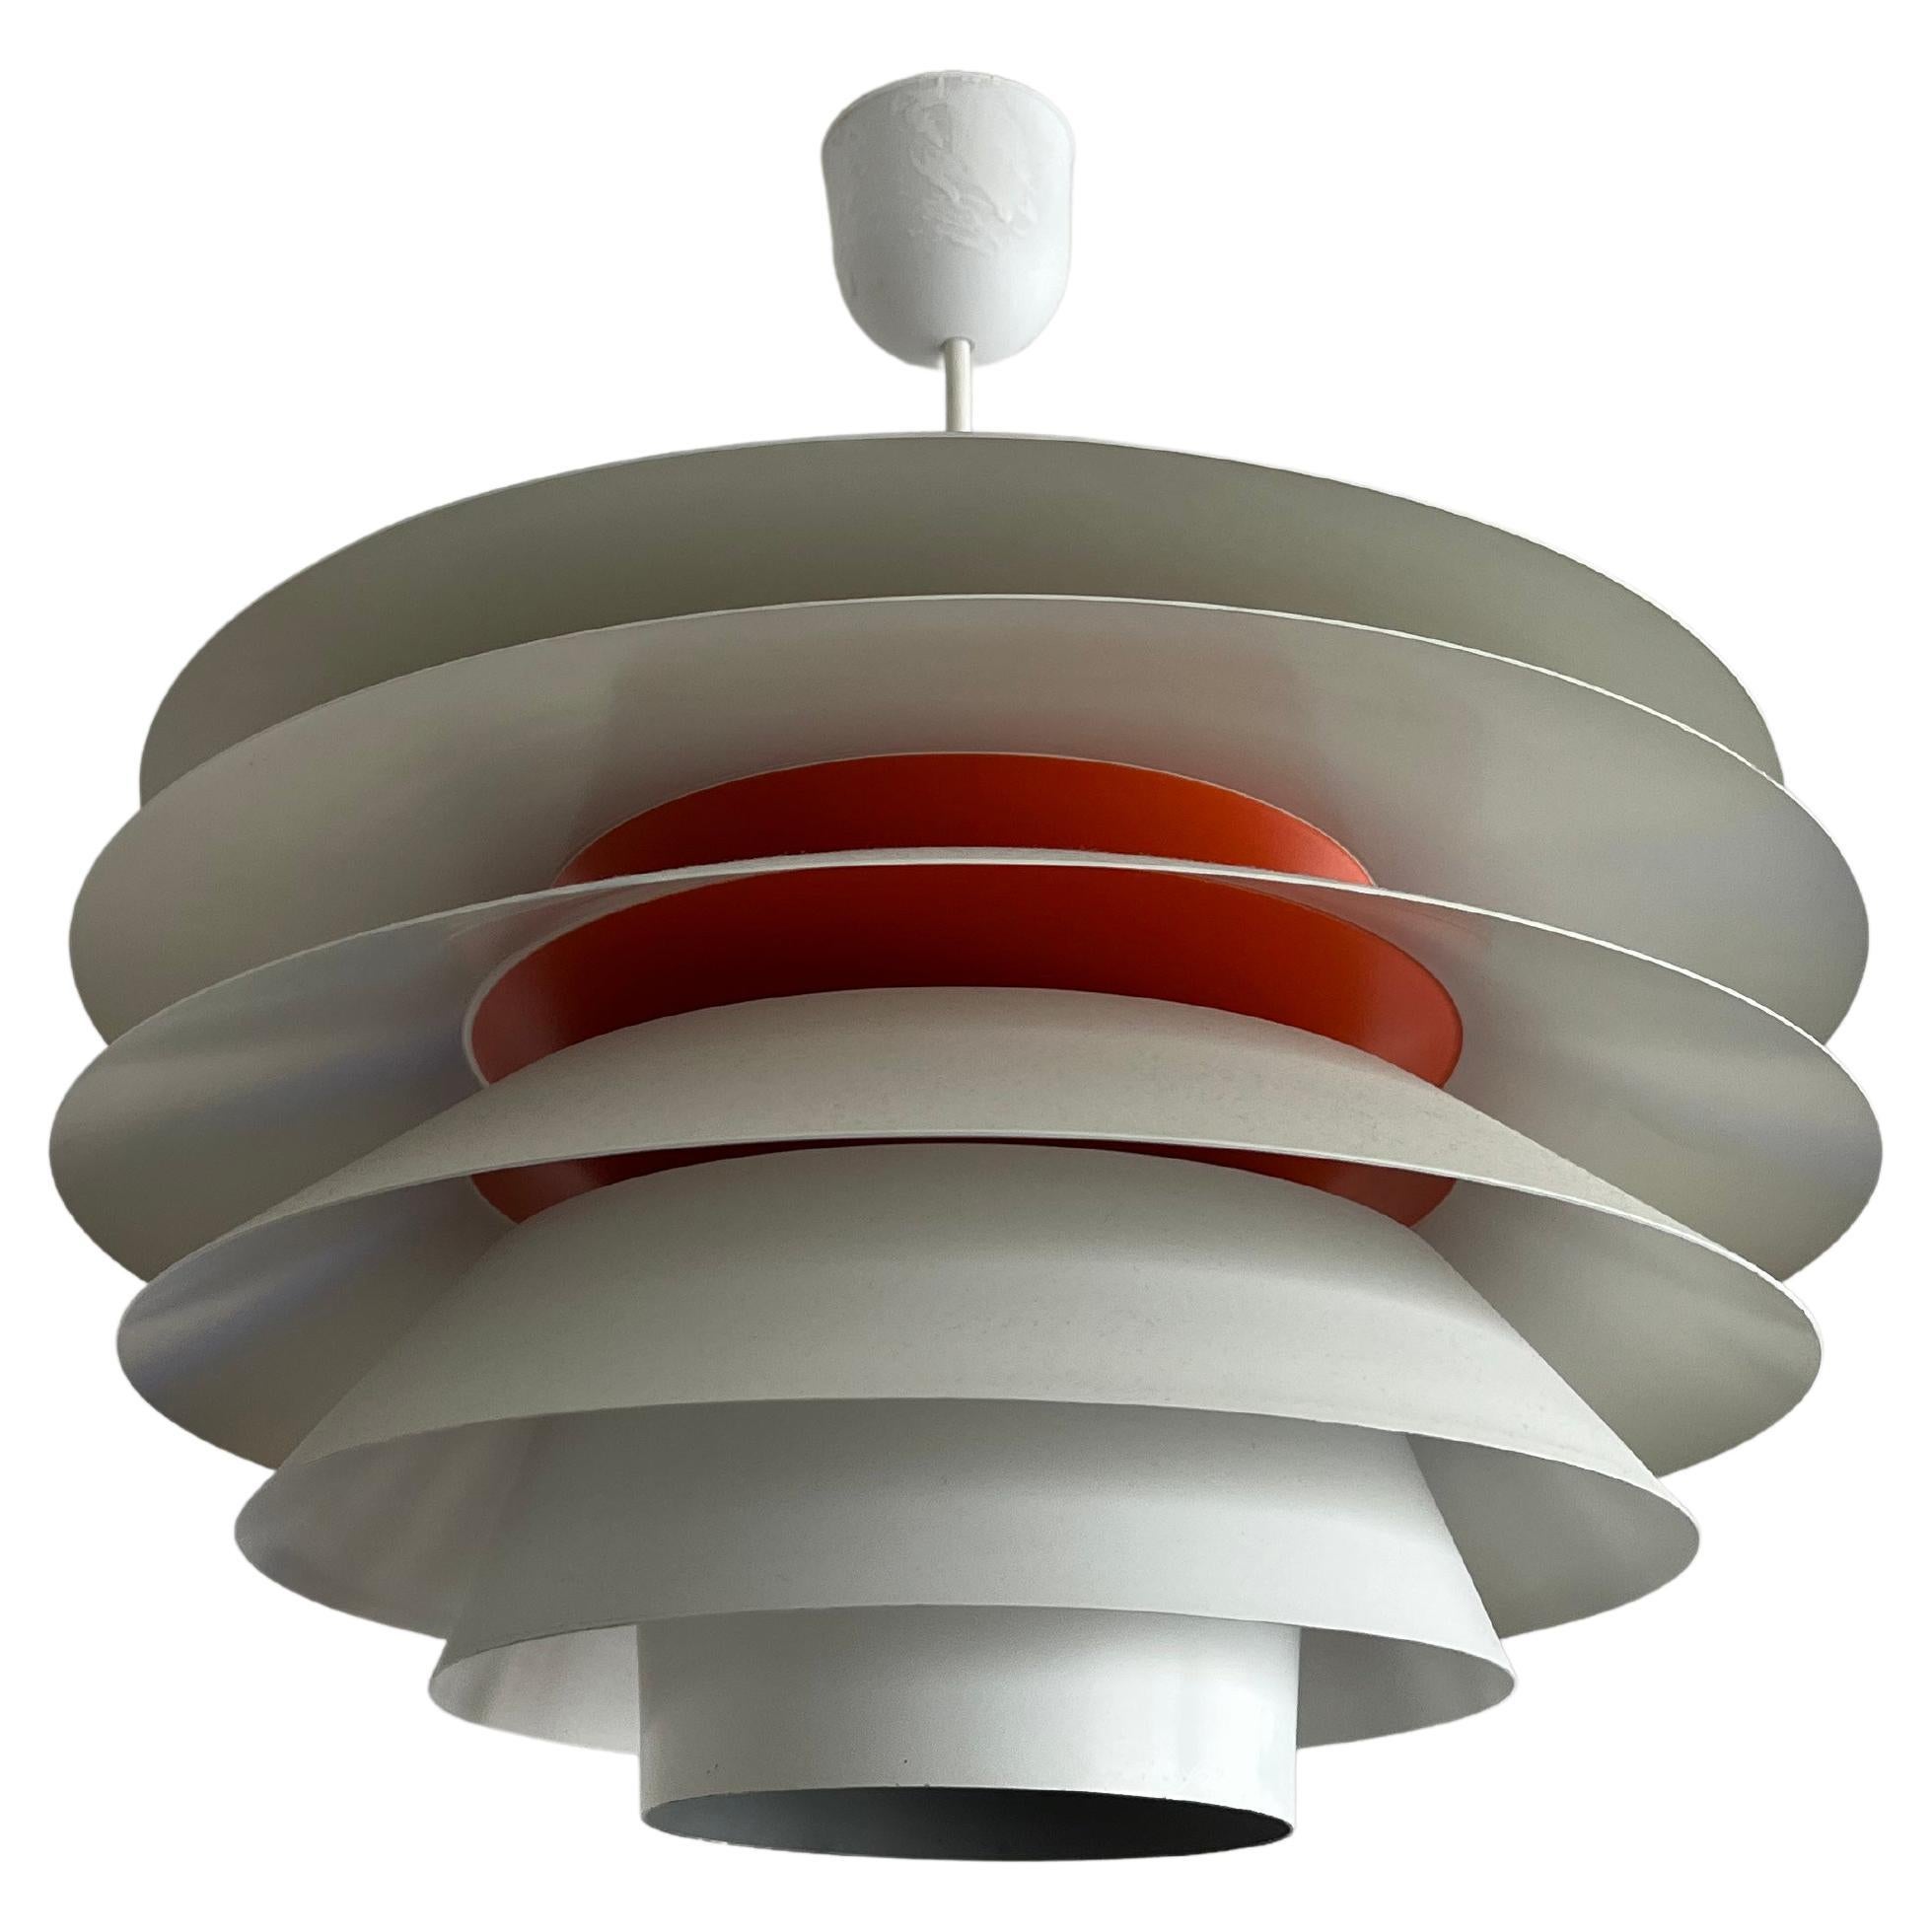 Pair of Svend Middelboe "Verona" Pendant Light Produced by Nordisk Solar, 1960s For Sale